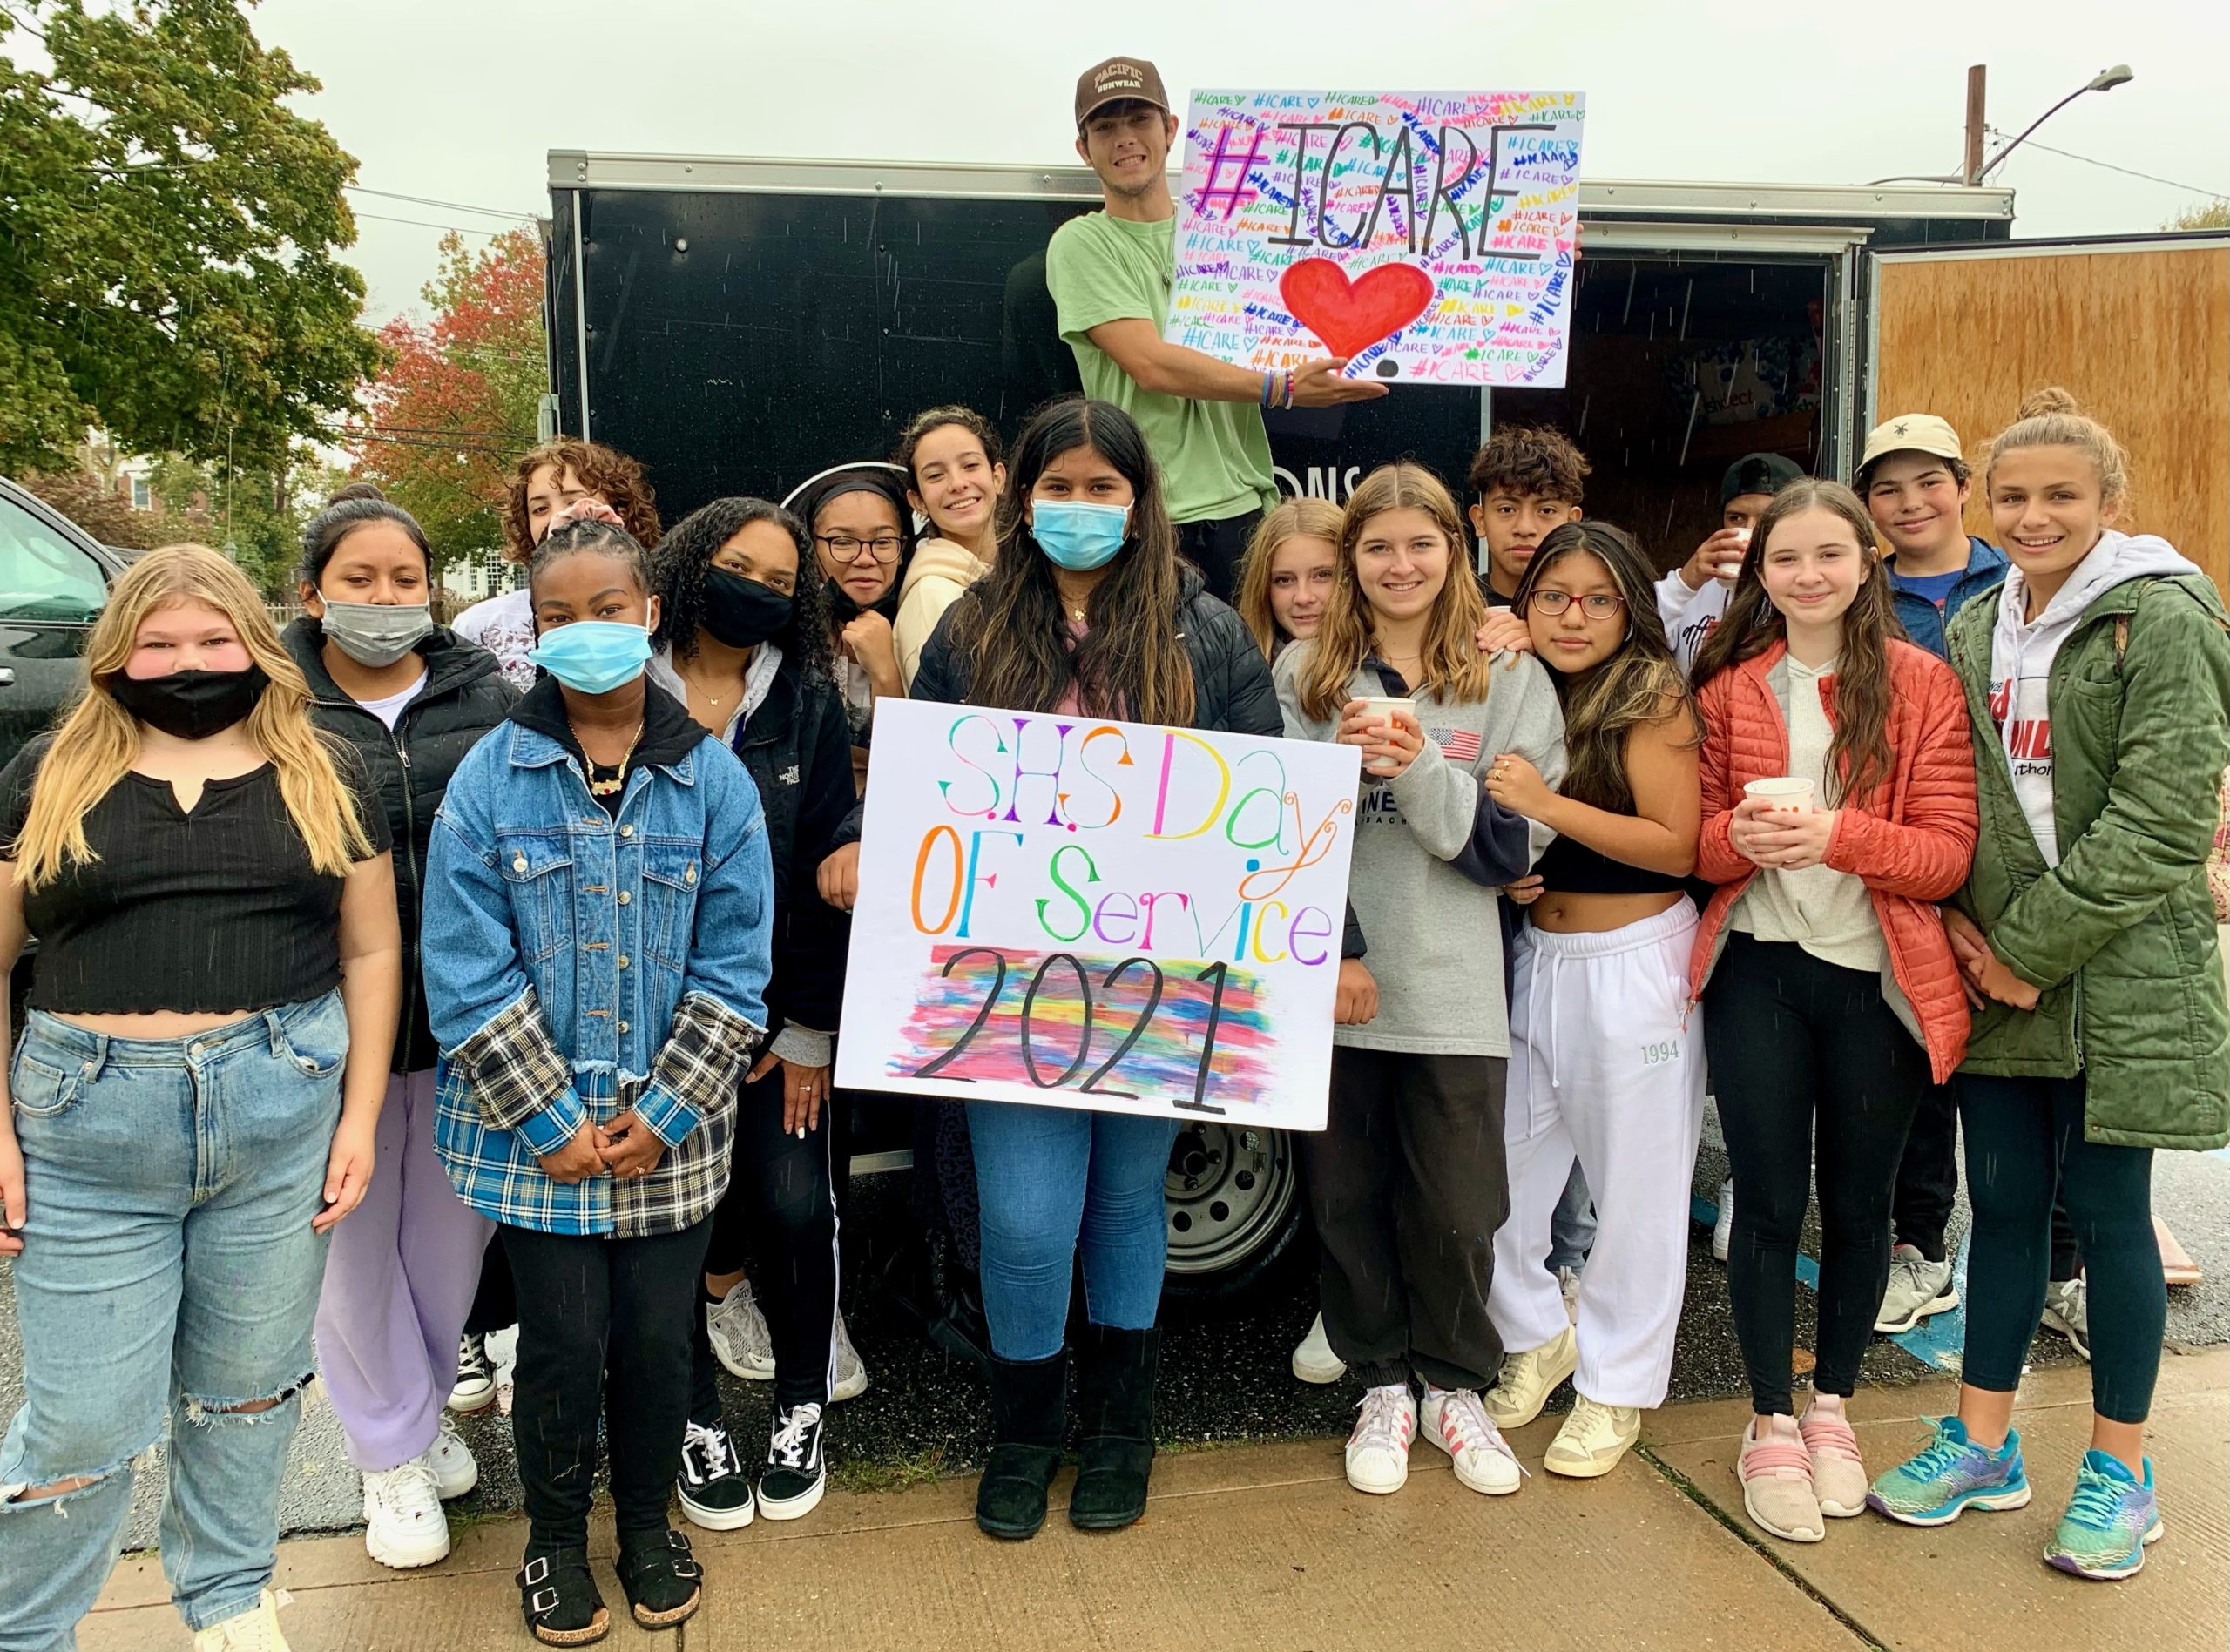 Despite a driving rain, 17 students from Southampton High School volunteered to participate in their school’s annual Day of Service on October 26. As part of the effort, the students packed 200 bags of food supplies and 150 personal care kits for underserved families within the Southampton community.